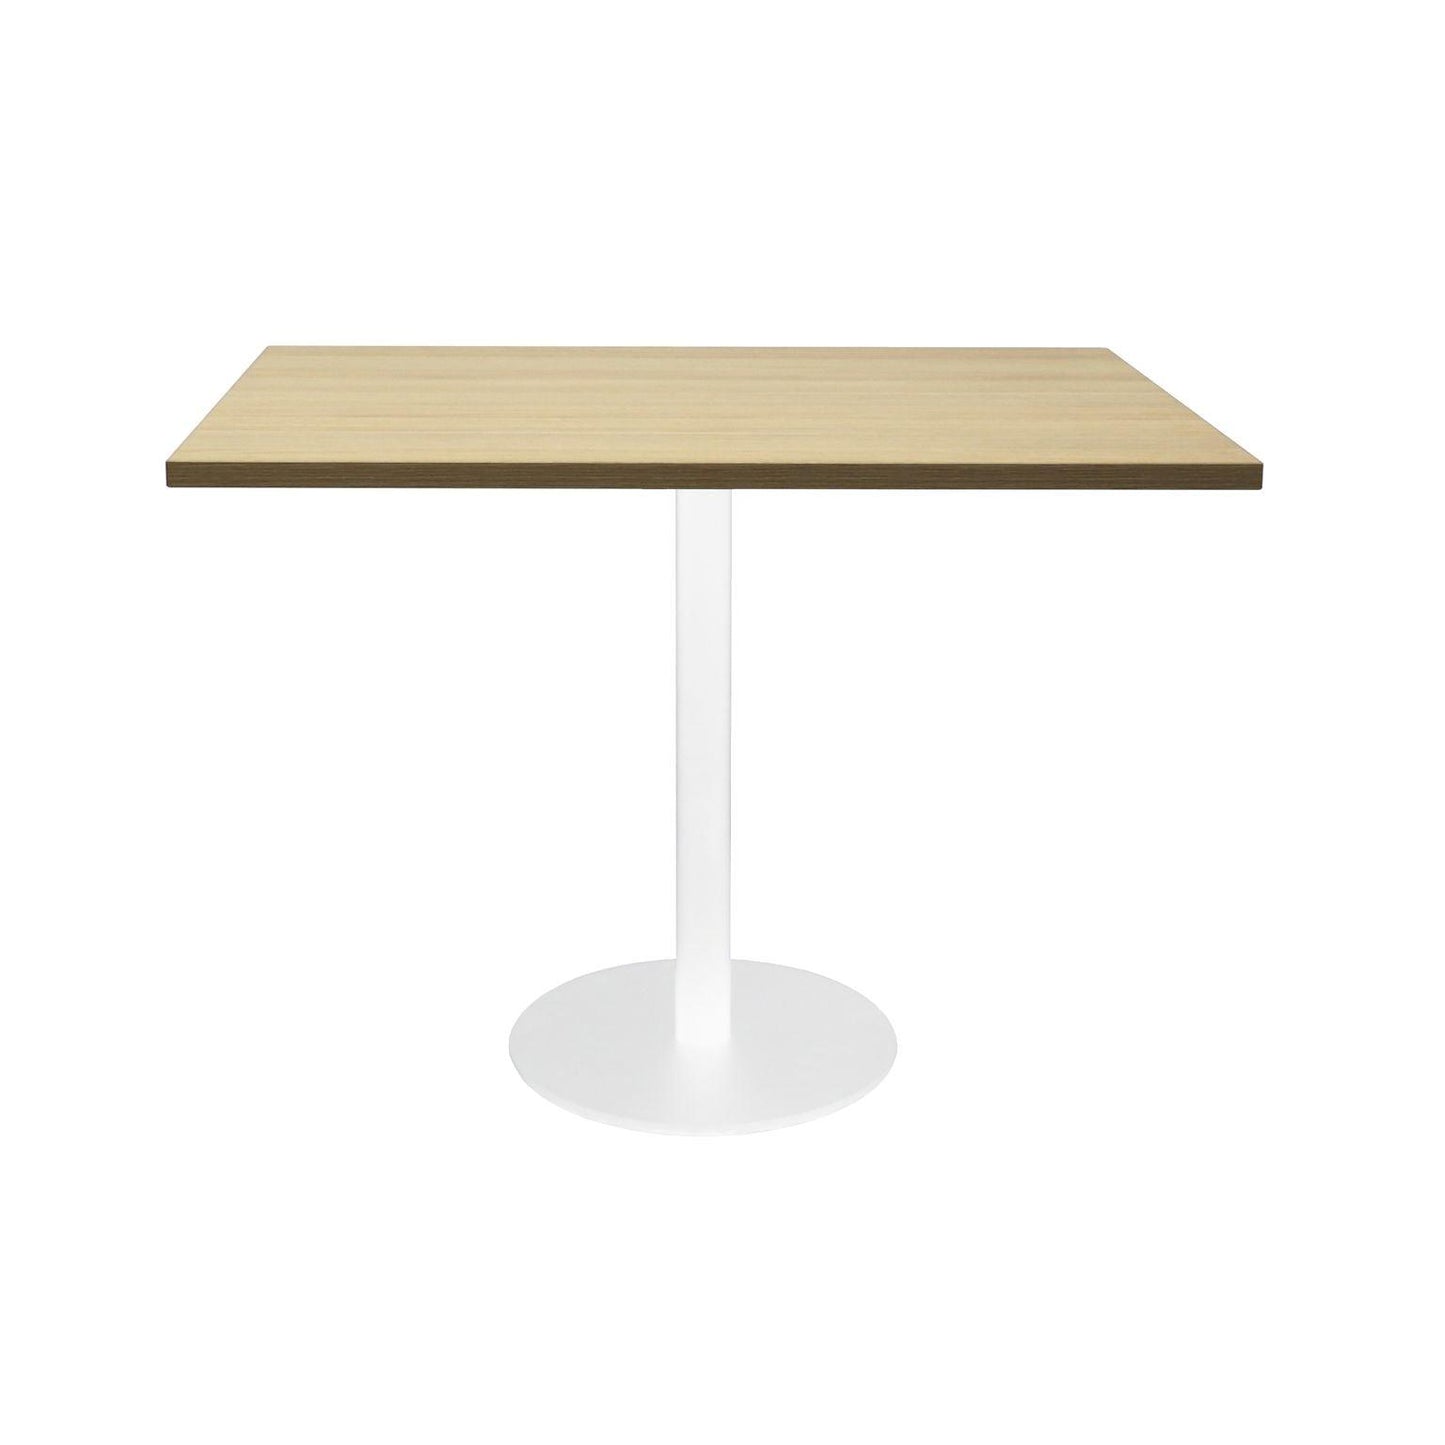 Infinity Square Meeting Table - Office Furniture Company 